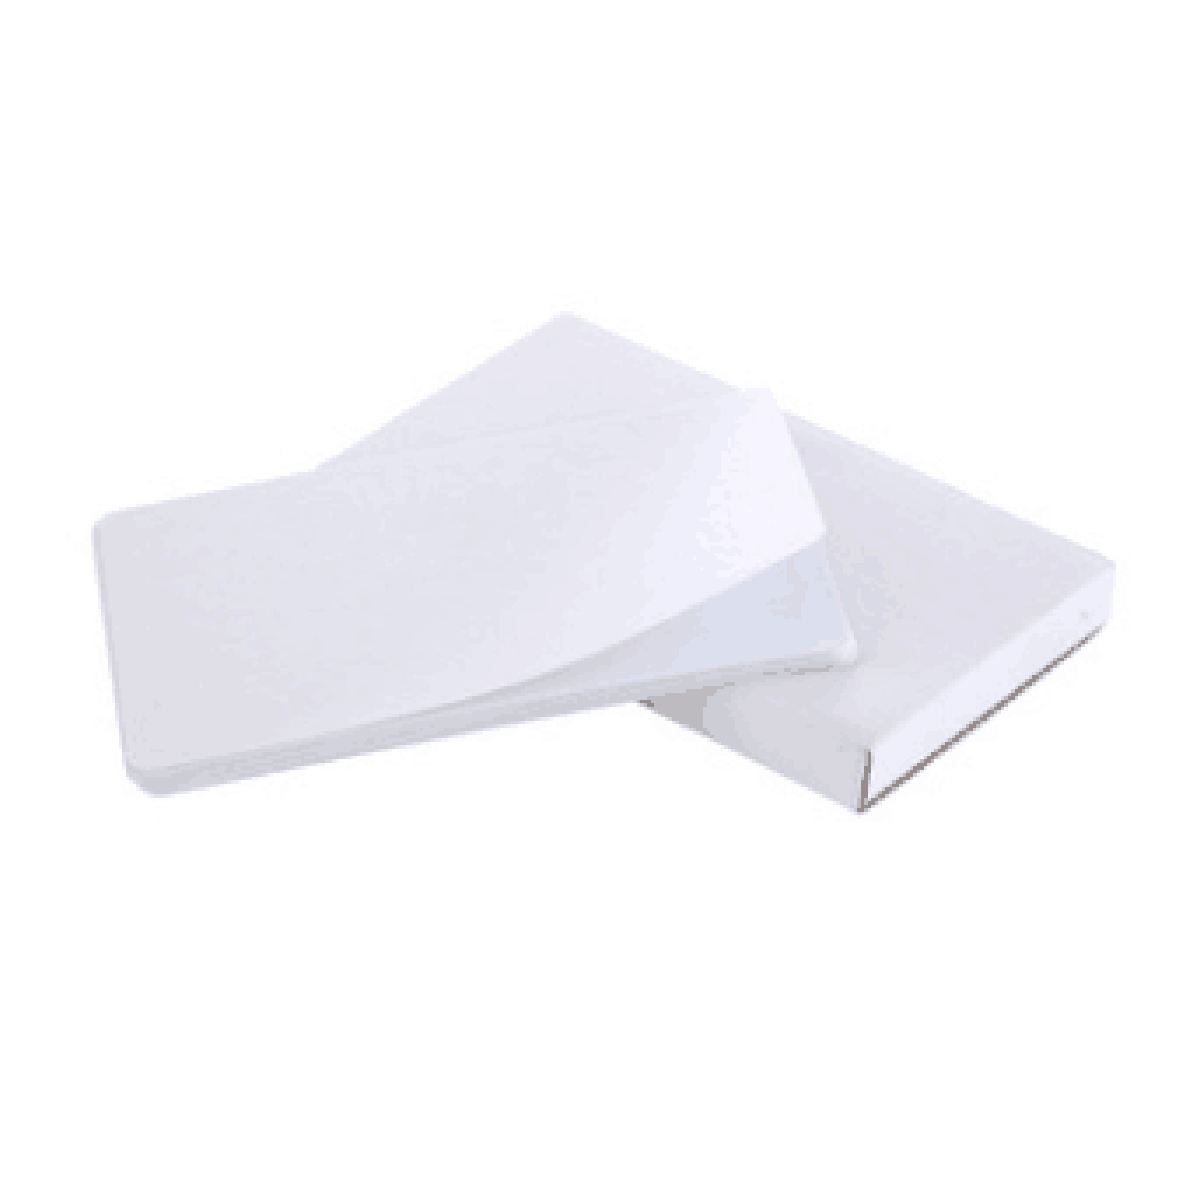 10pcs Printer cleaning card for Matica EDI CARDS 85x150mm